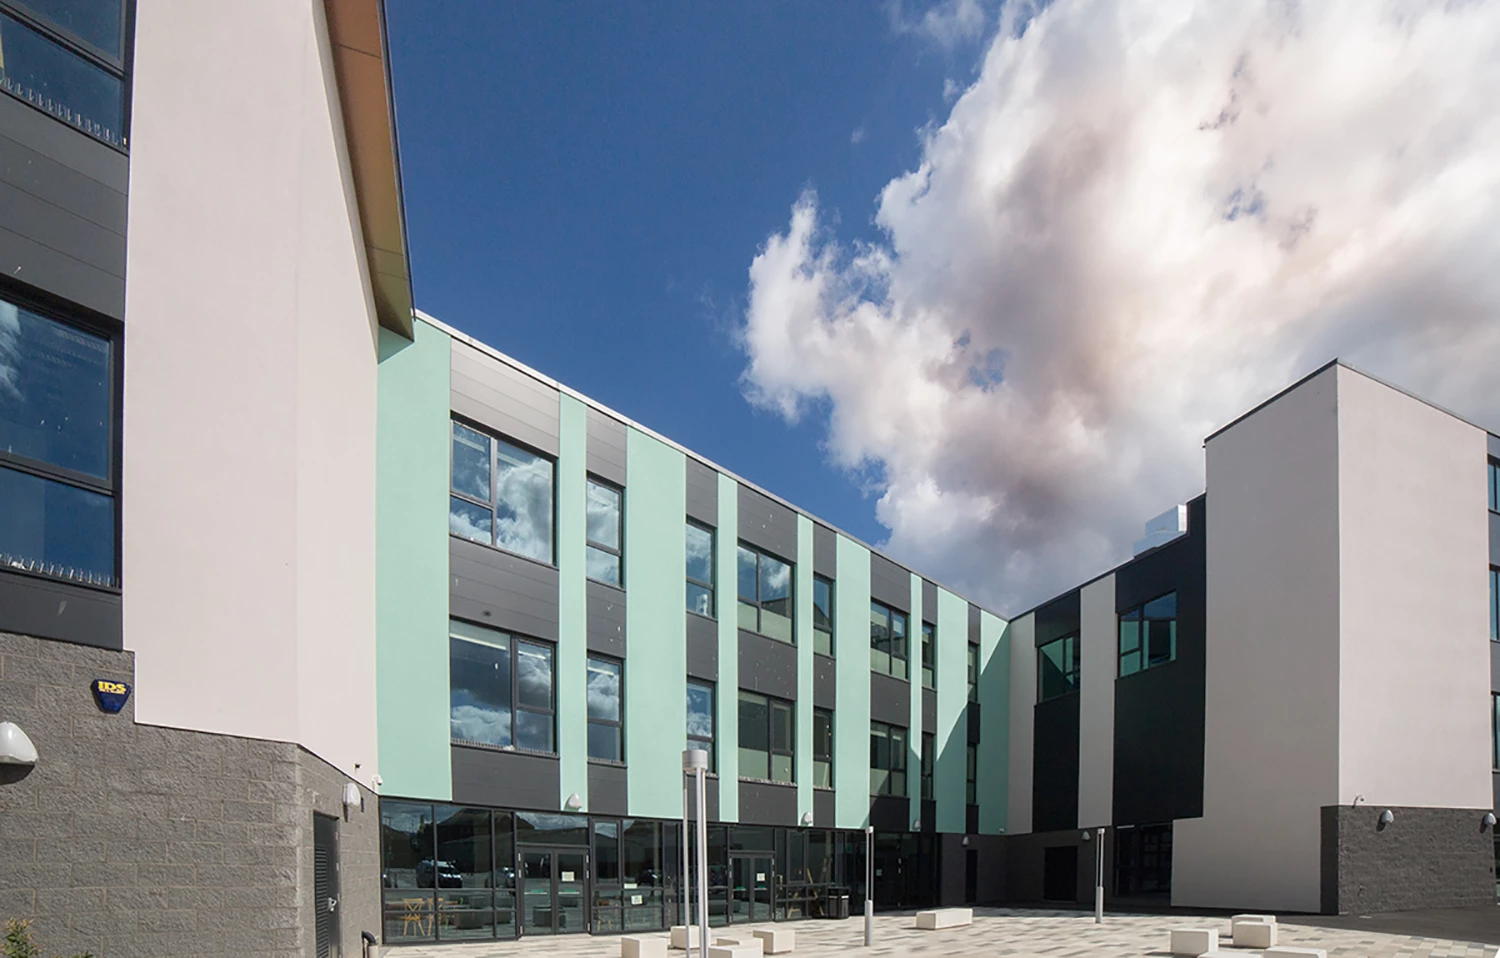 1 Church Street - CCAD's campus in Hartlepool and soon to be renamed The Northern School of Art